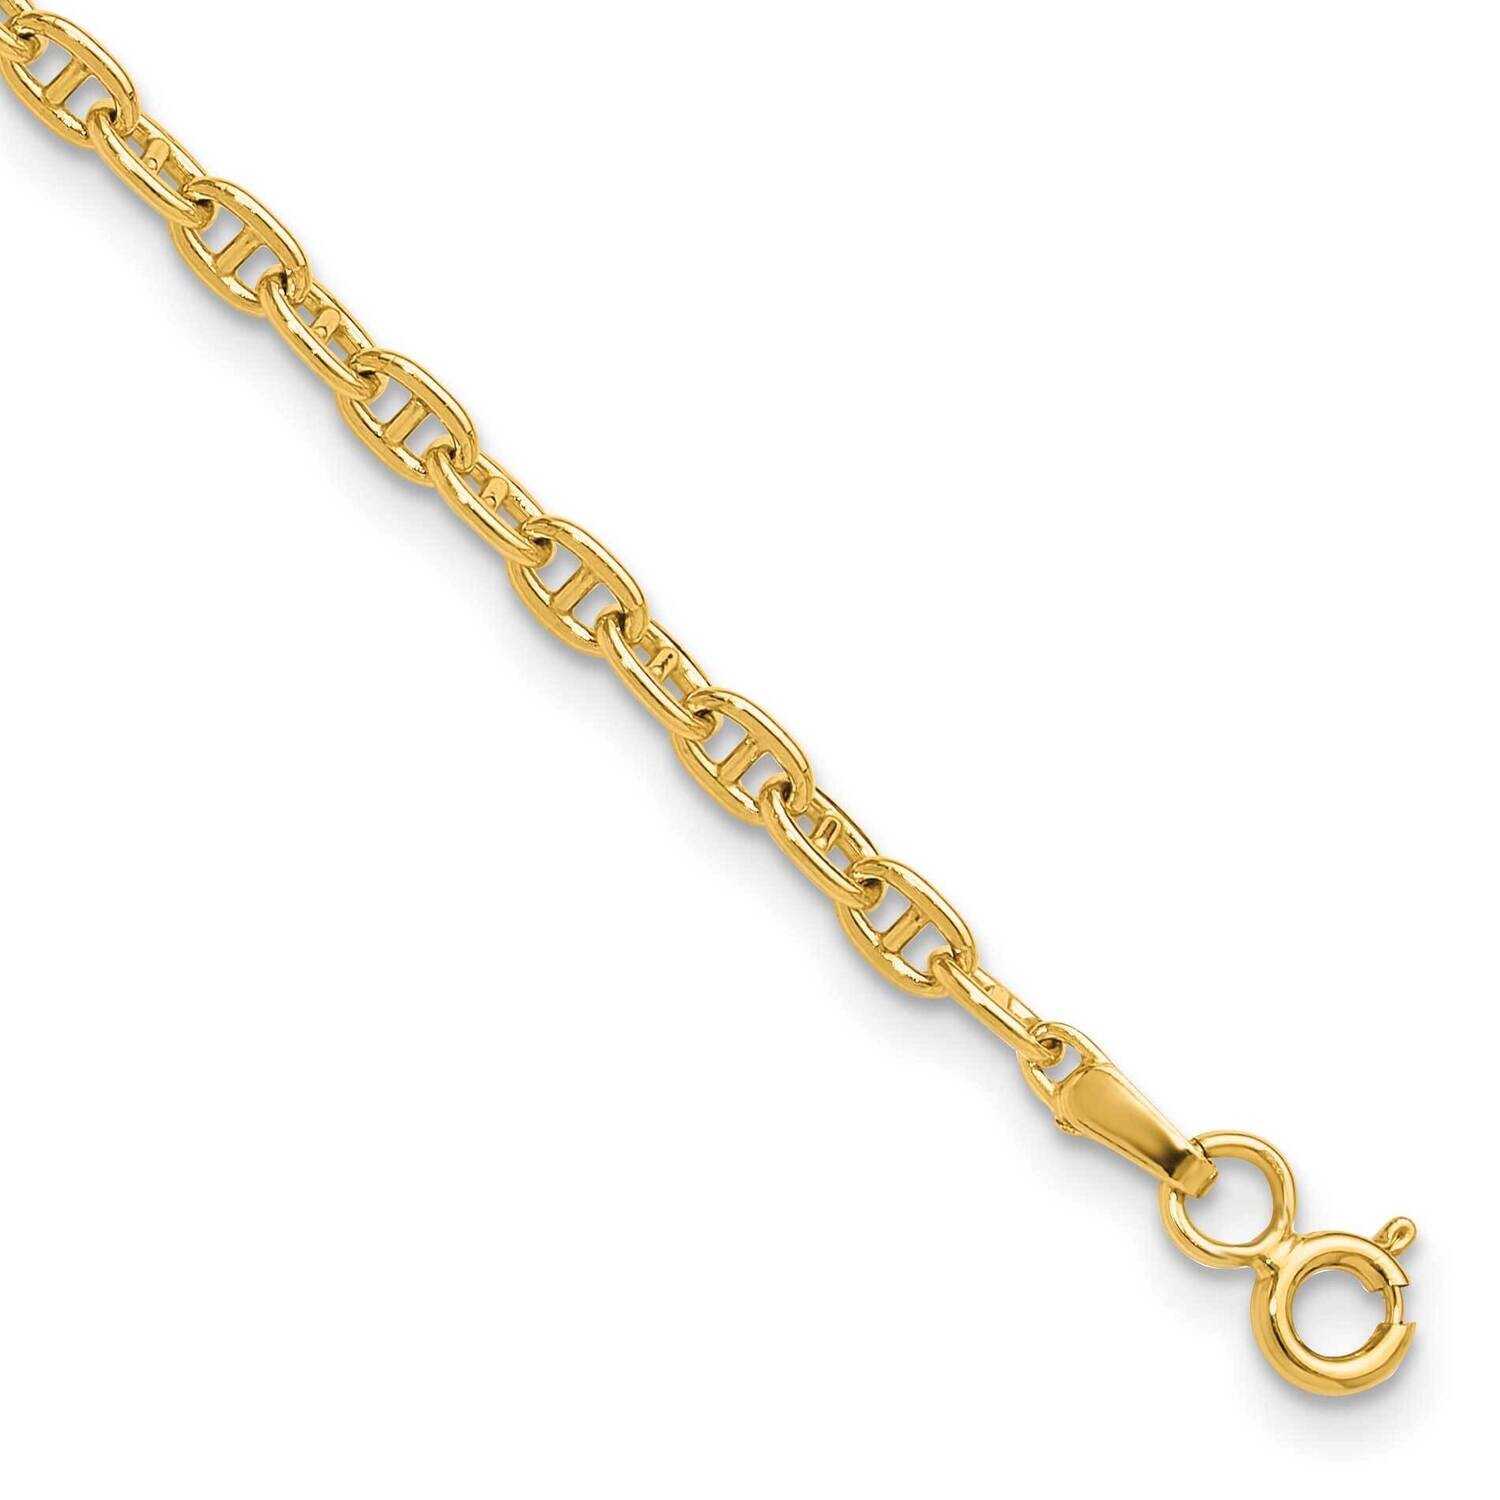 3.0mm Mariners Link Chain 7 Inch 14k Gold MA080-7